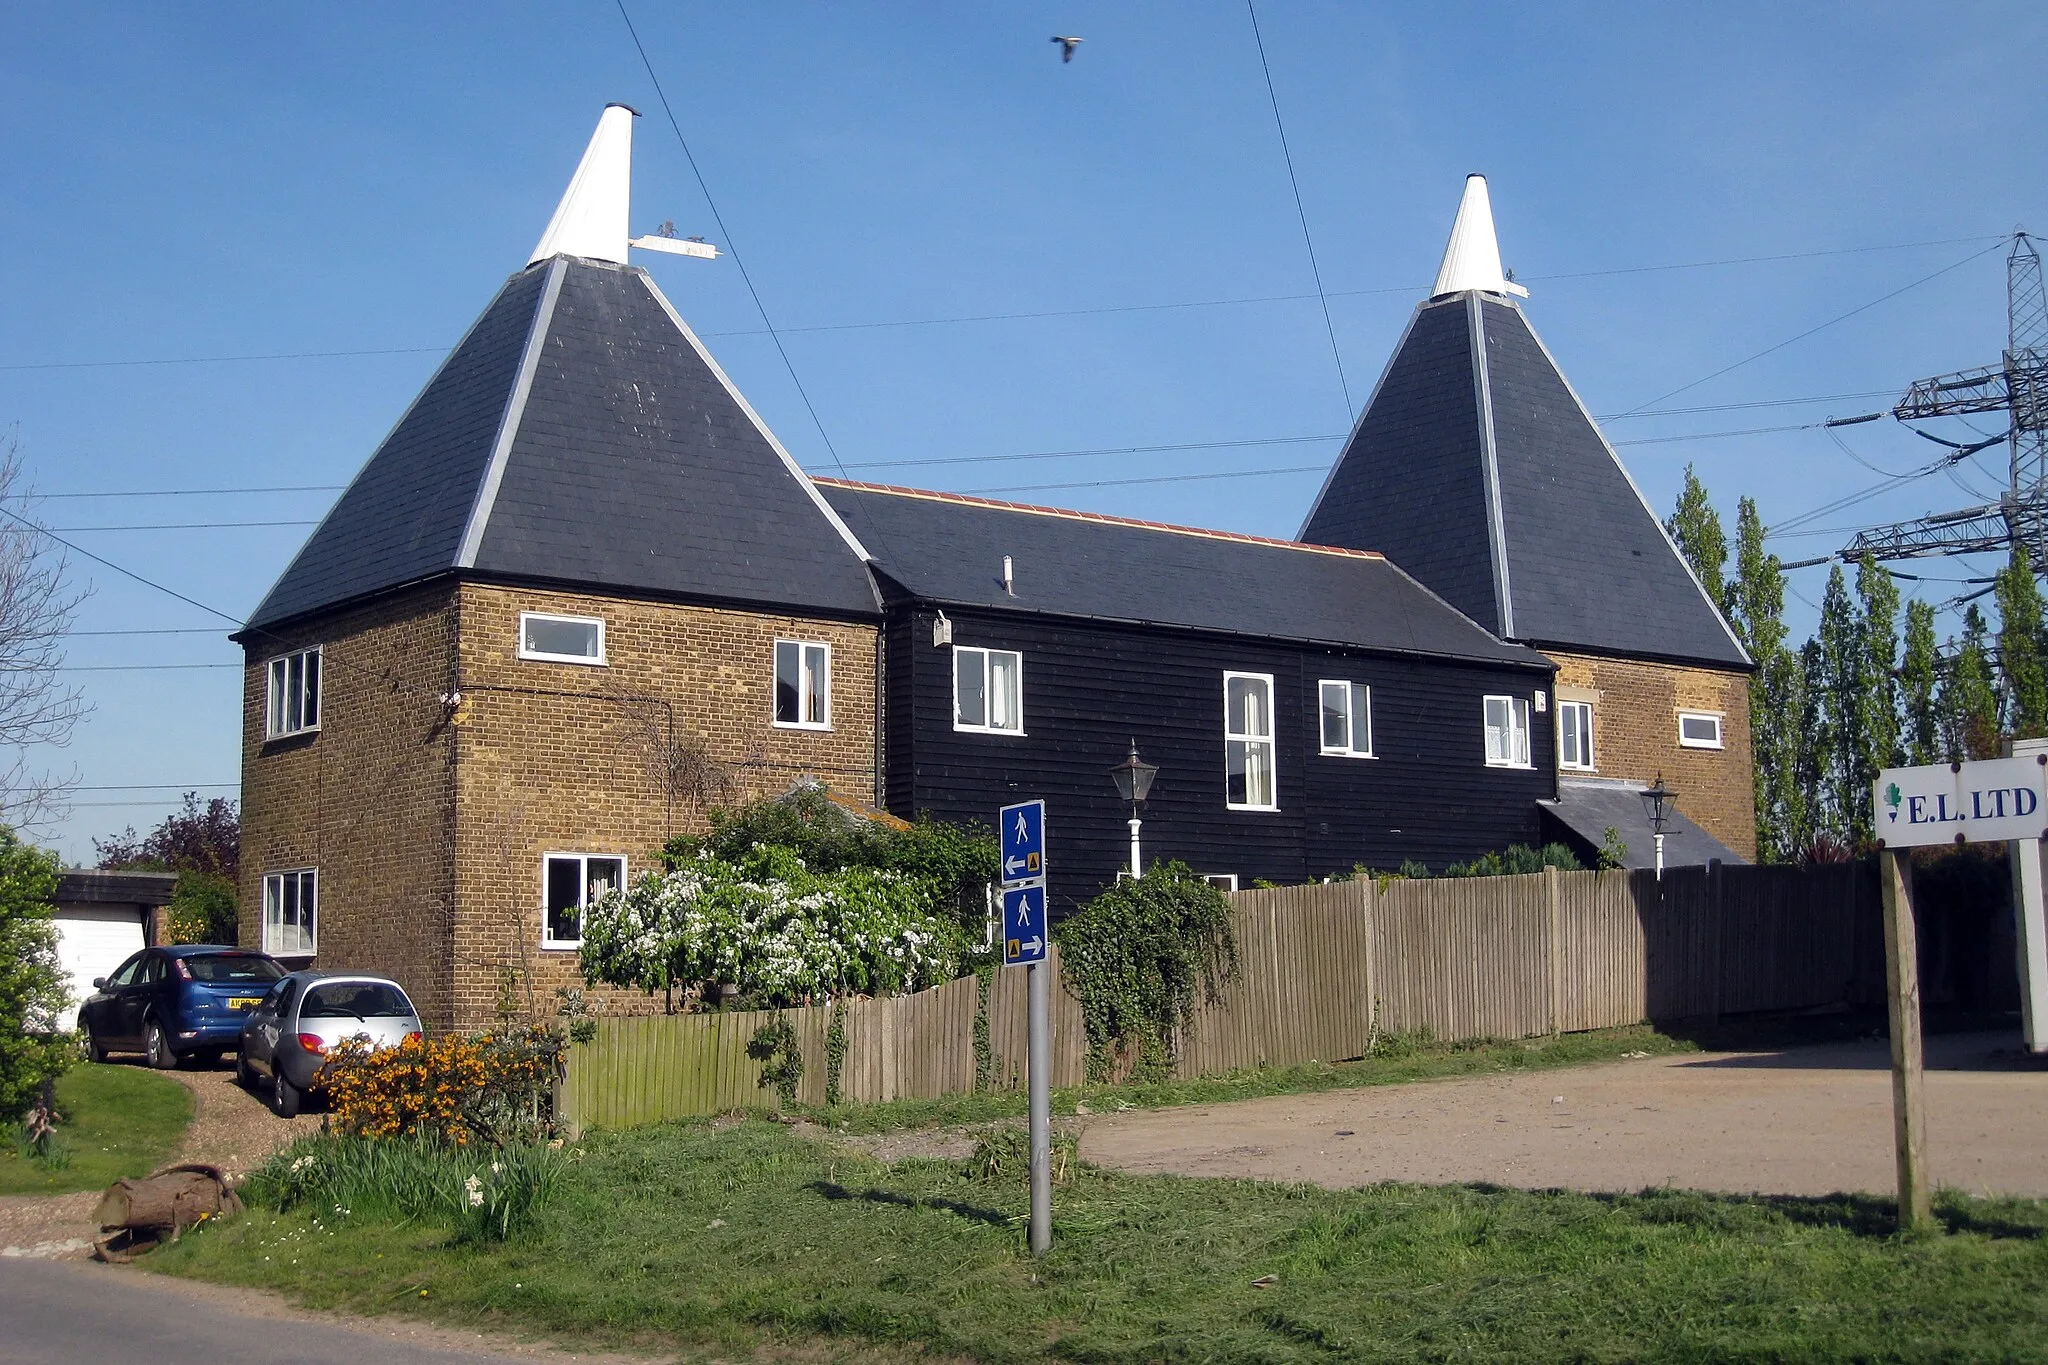 Photo showing: The Old Oast, Swanscombe, Kent Twin square kiln oast house.